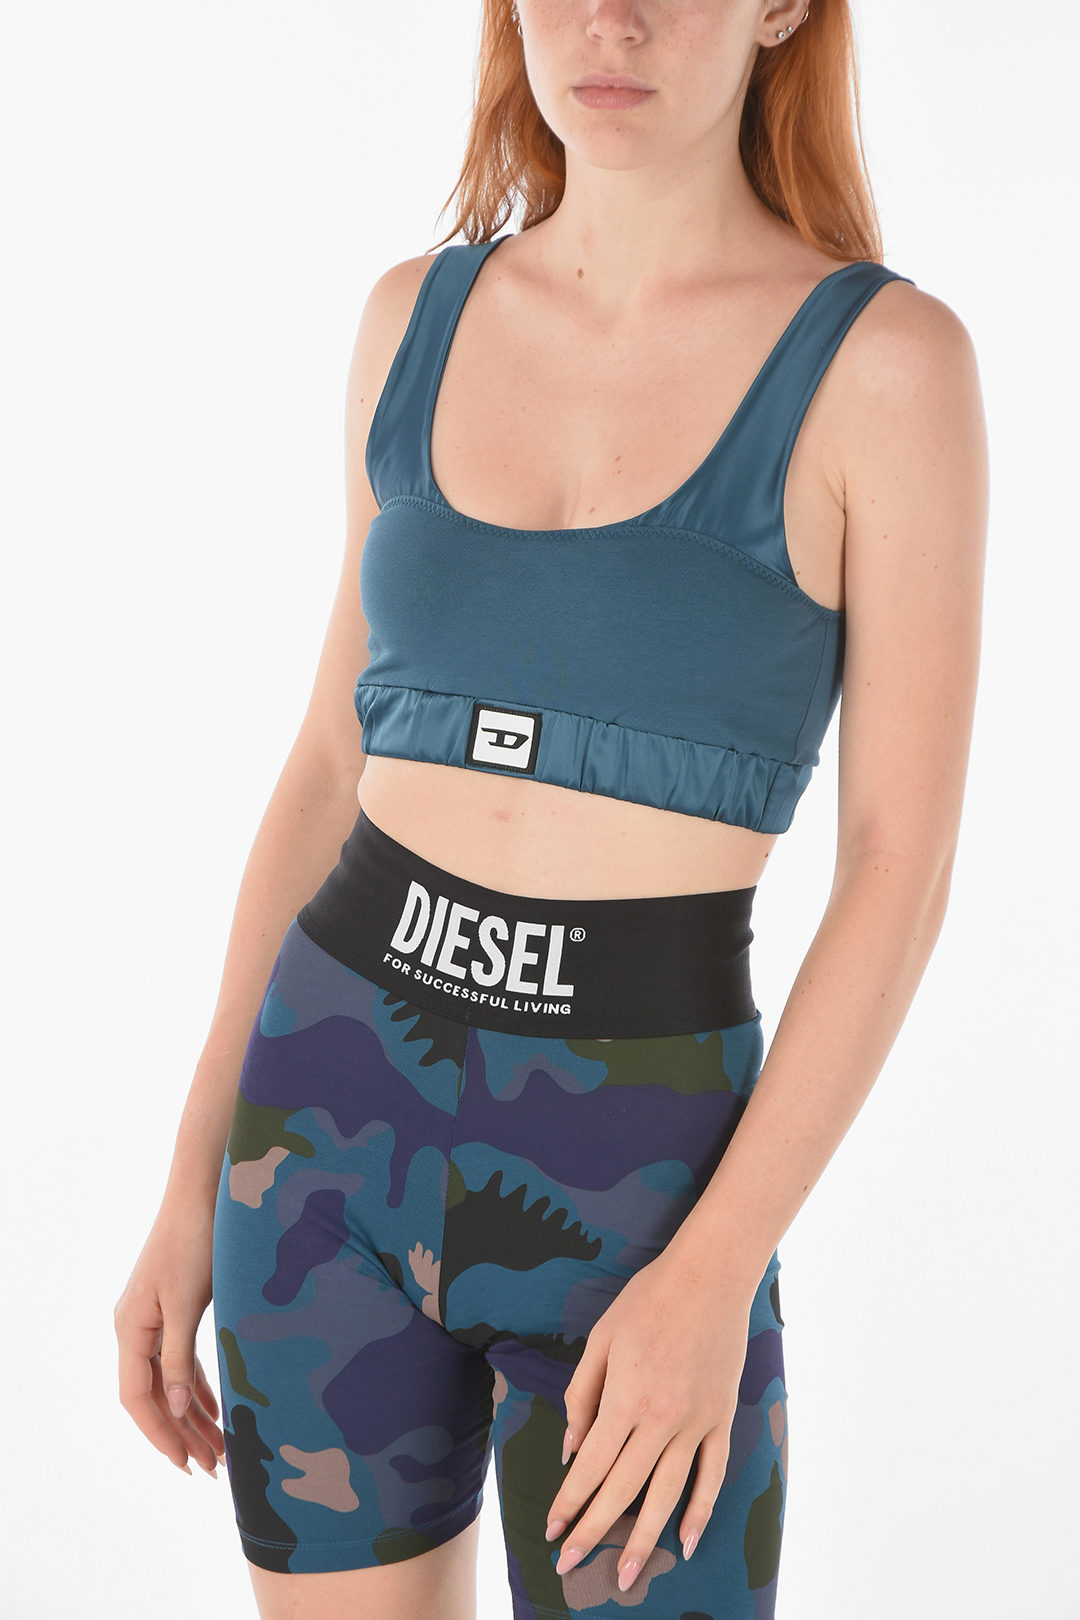 https://data.glamood.com/imgprodotto/solid-color-active-crop-top-with-logo-detail_1196496_zoom.jpg